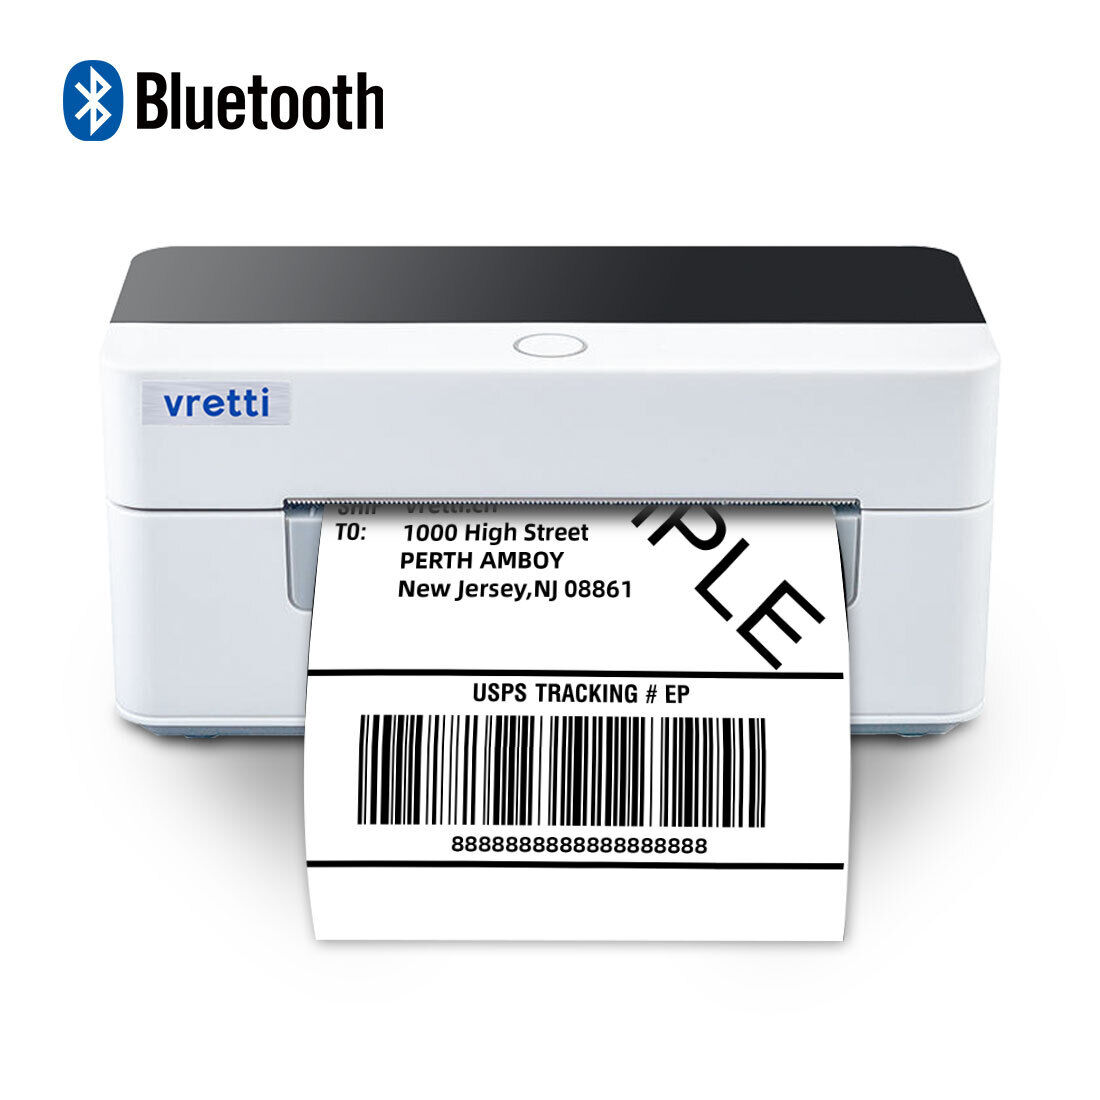 VRETTI Bluetooth Thermal Shipping Label Printer 4x6 For UPS USPS Amazon PayPal